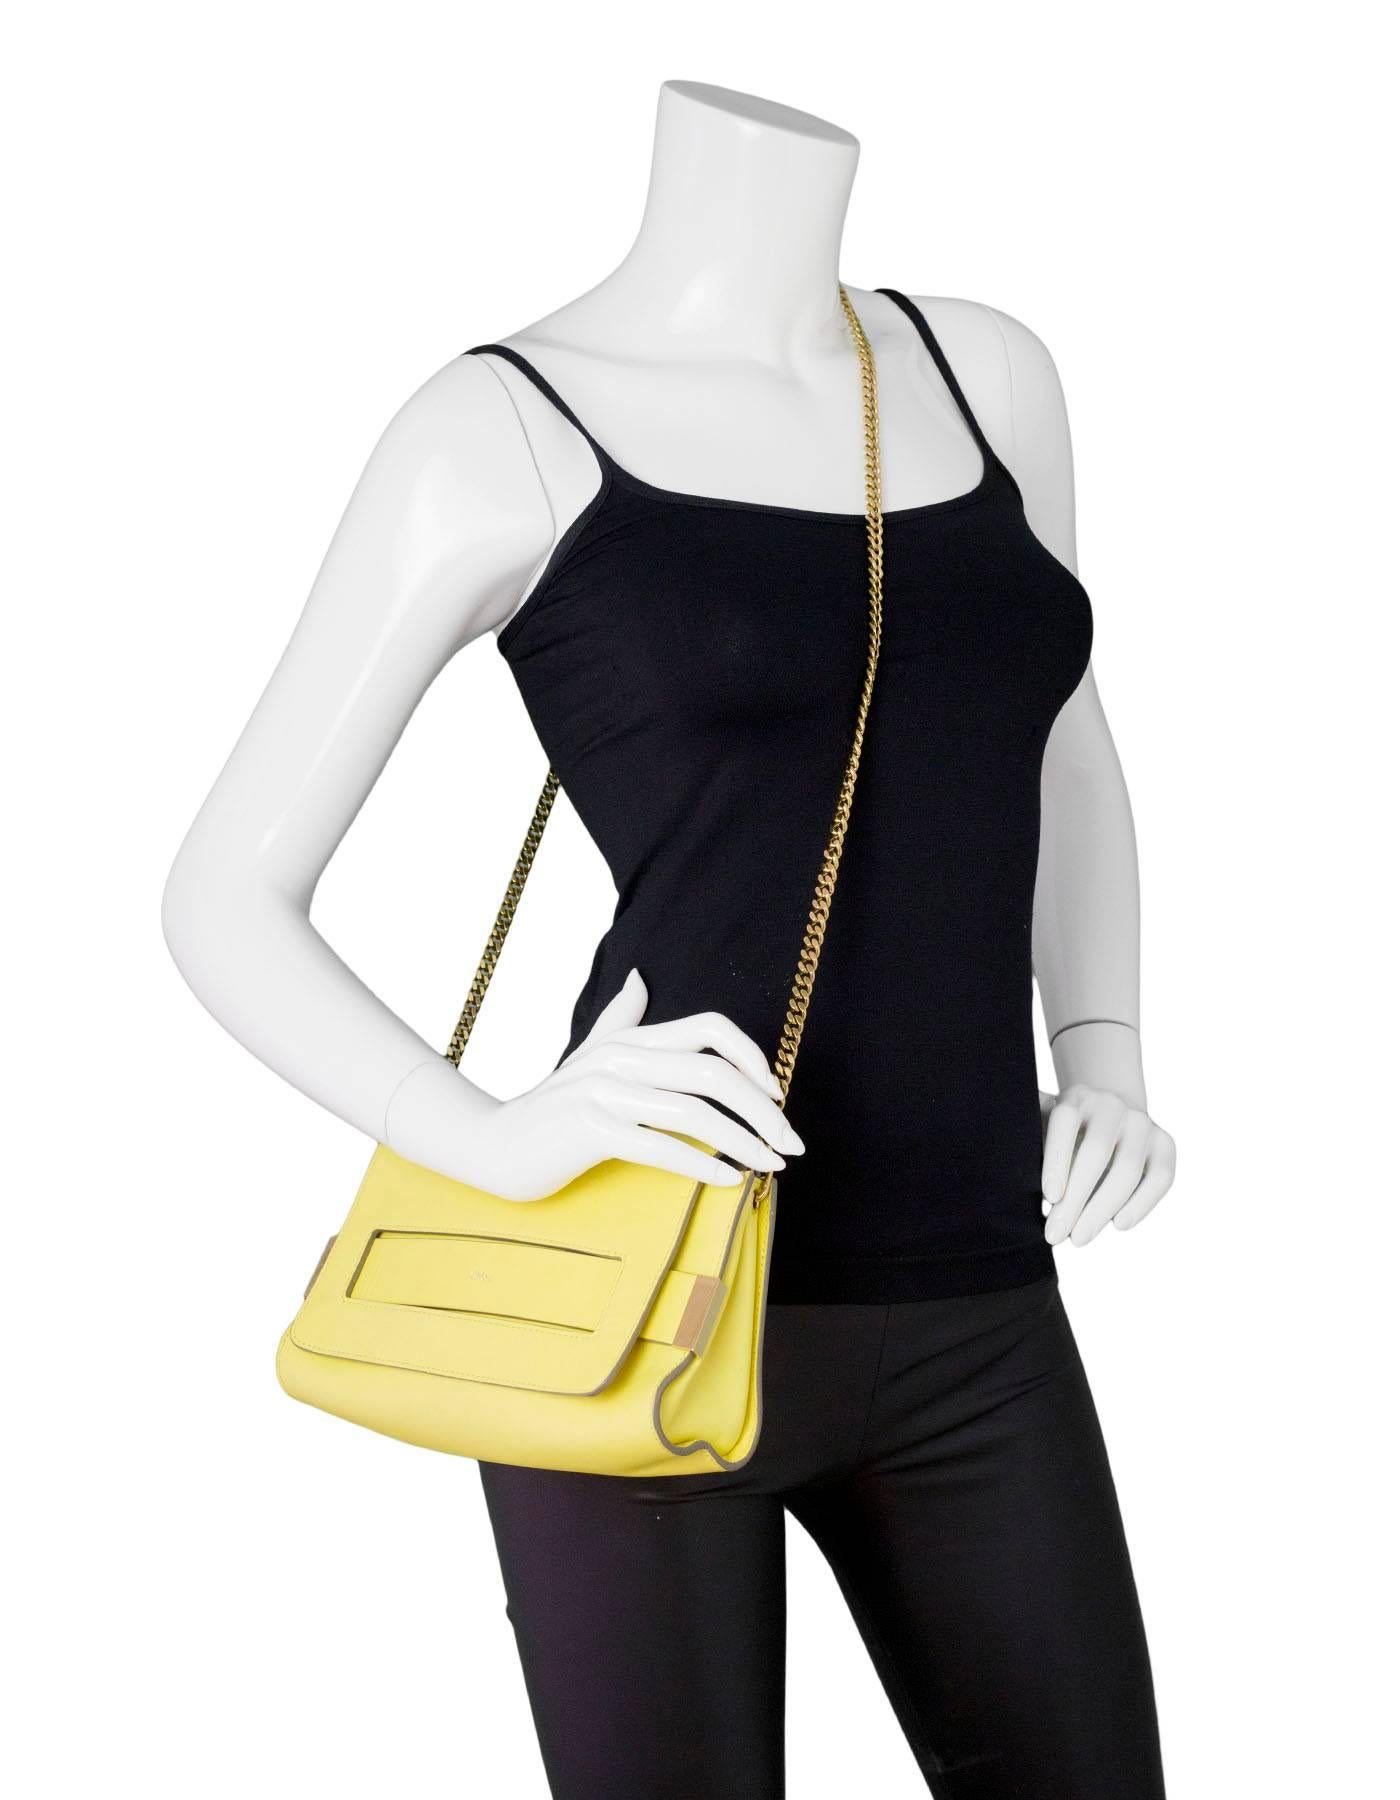 Chloe Yellow Leather Elle Crossbody Bag

Made In: Italy
Color: Yellow
Hardware: Goldtone
Materials: Leather, metal
Lining: Beige leather
Closure/Opening: Flap top with magnetic closure
Exterior Pockets: One front flap pocket
Interior Pockets: Three